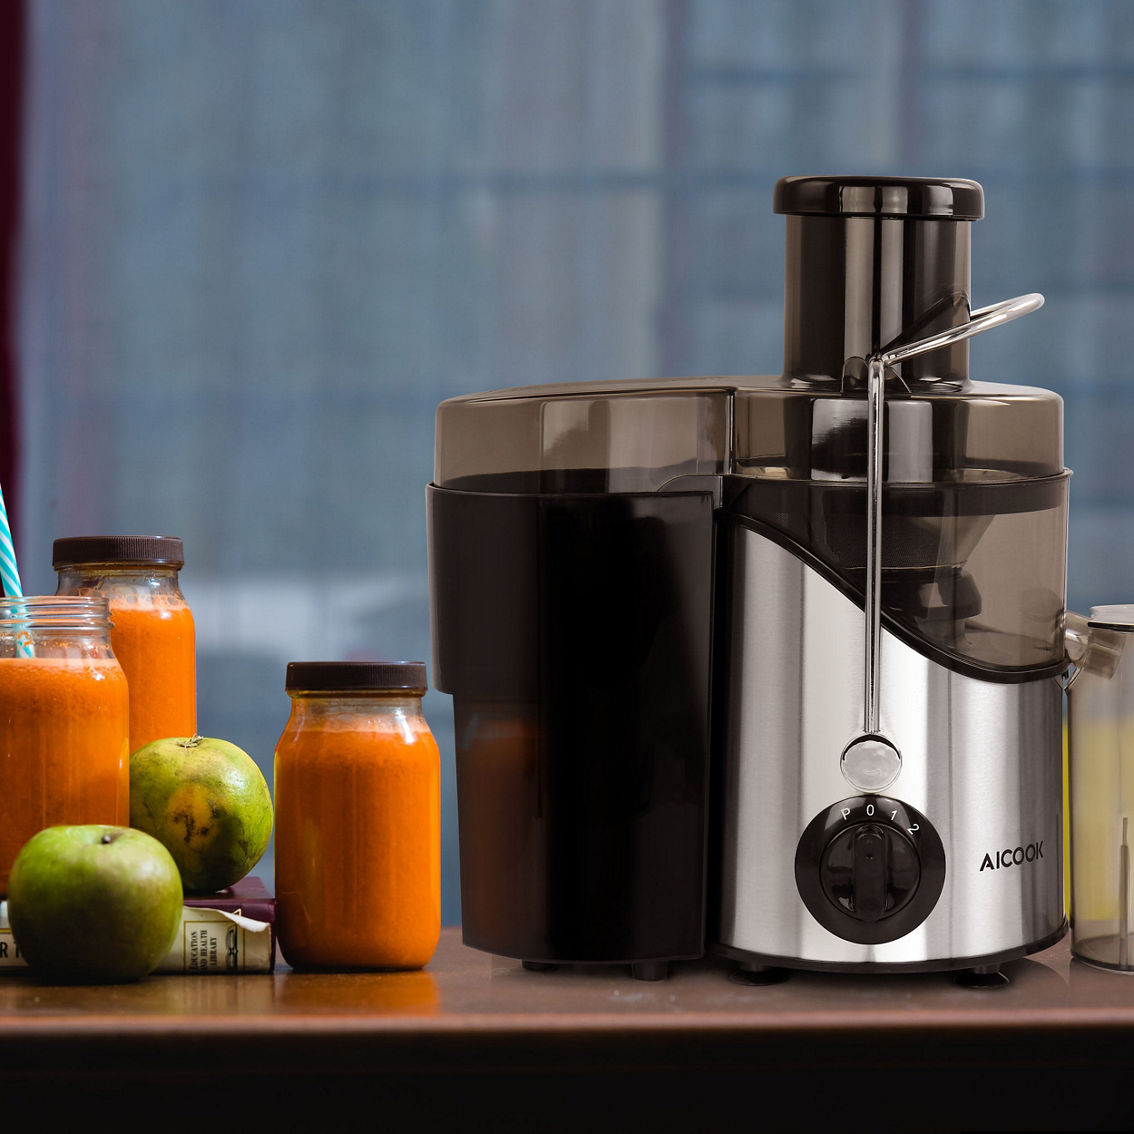 AICOOK Centrifugal Self Cleaning Juicer and Juice Extractor in Silver - Image 5 of 5